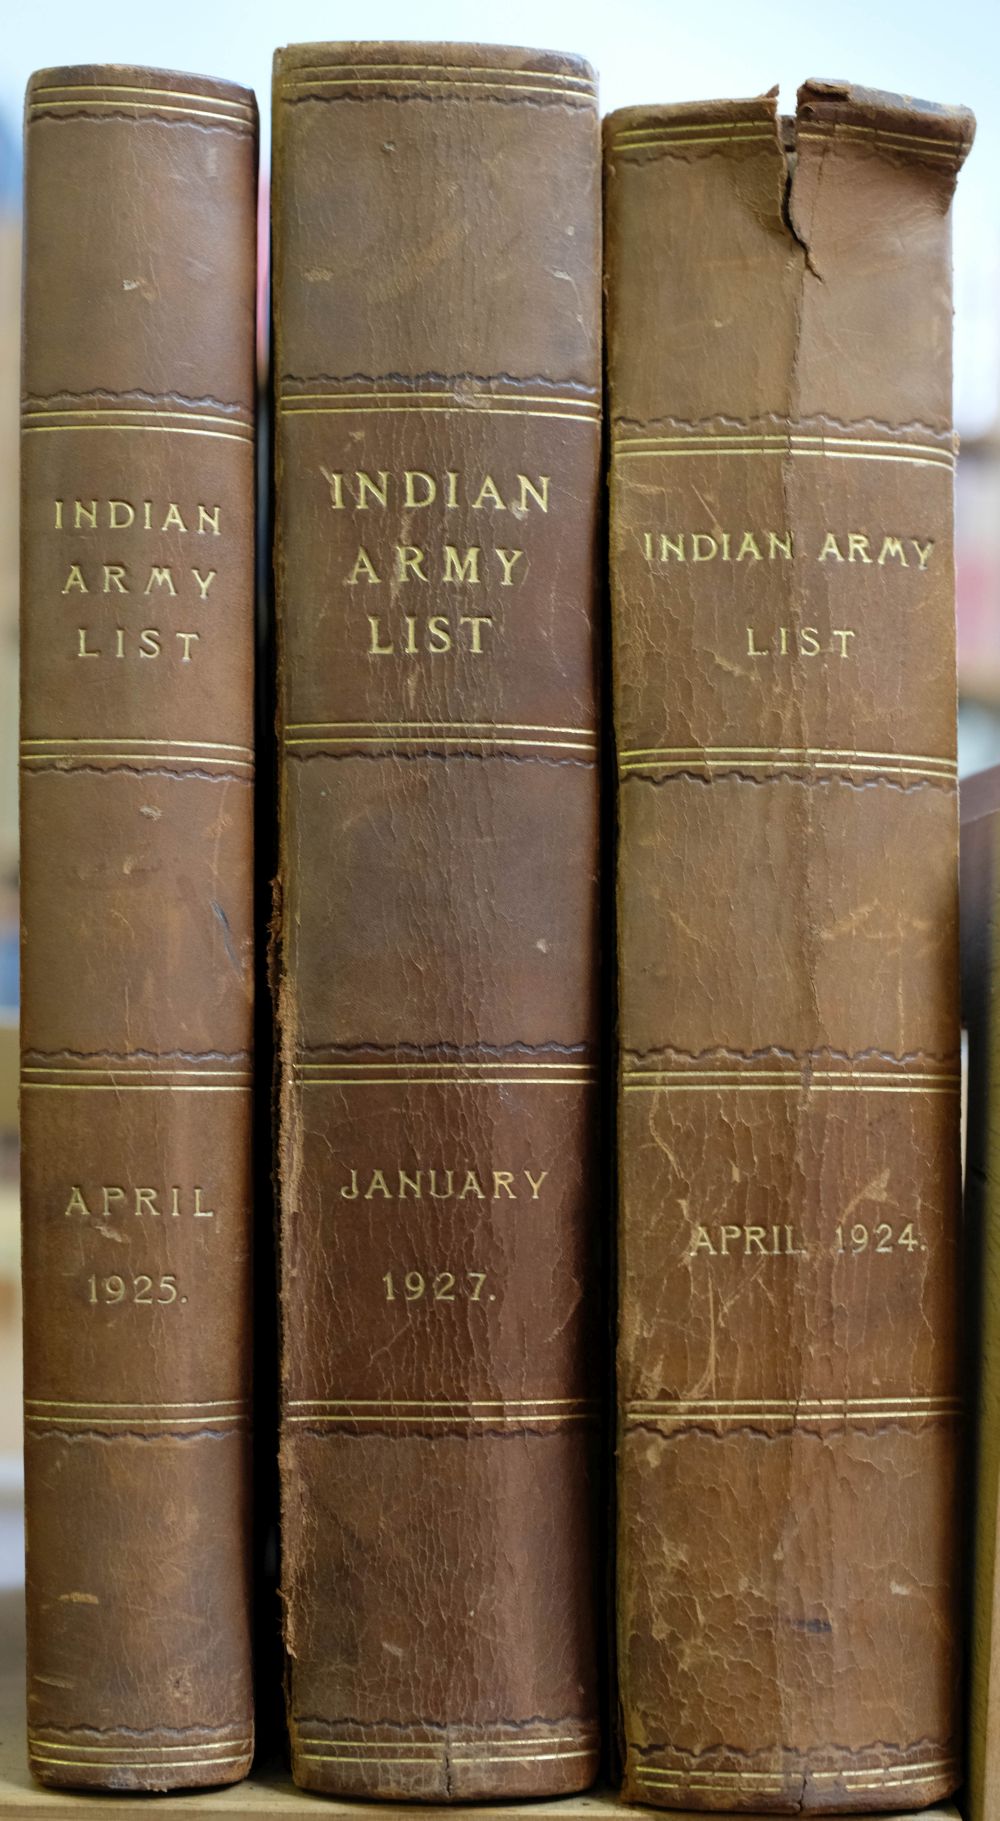 Indian Army Lists. The Indian Army List, April 1924, April 1925 & January 1927